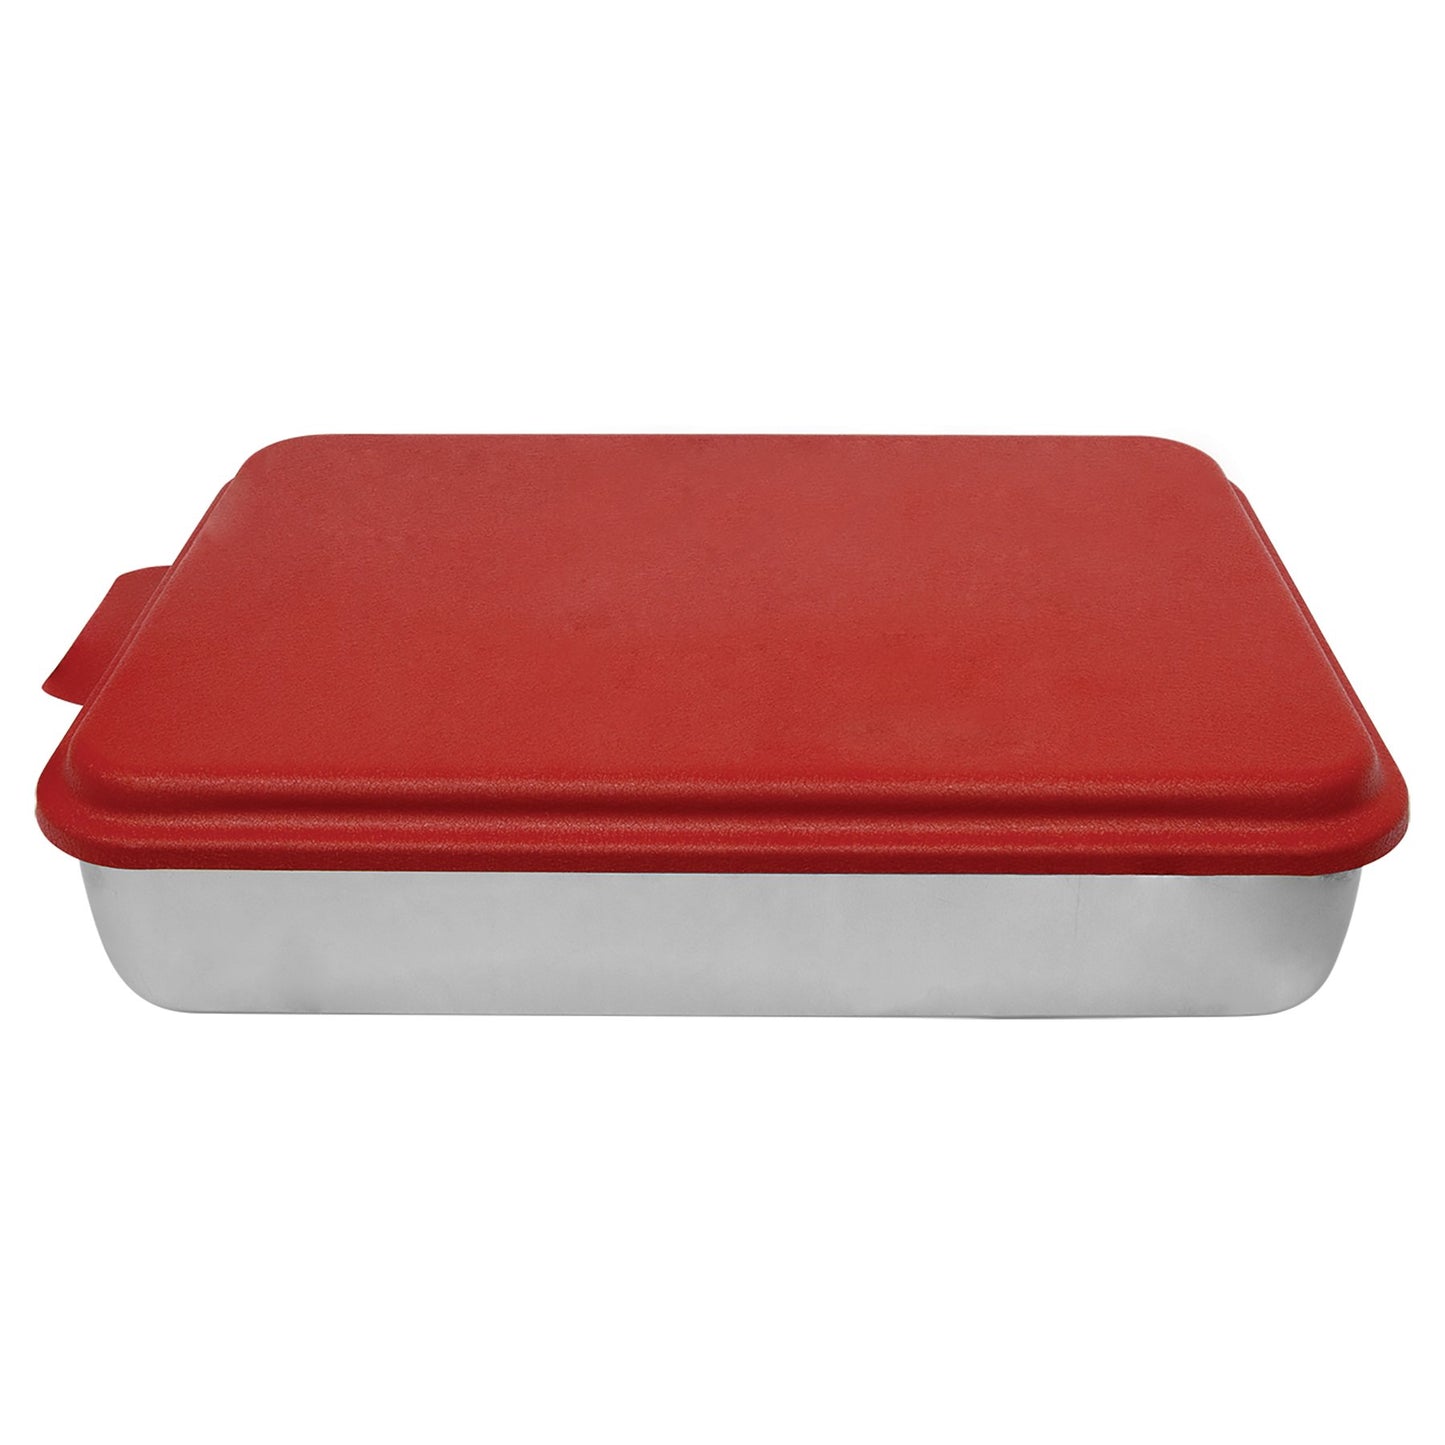 Personalized 9x13" Cake Pan with snap-on Lid - Etchified-Etchified-BPN102